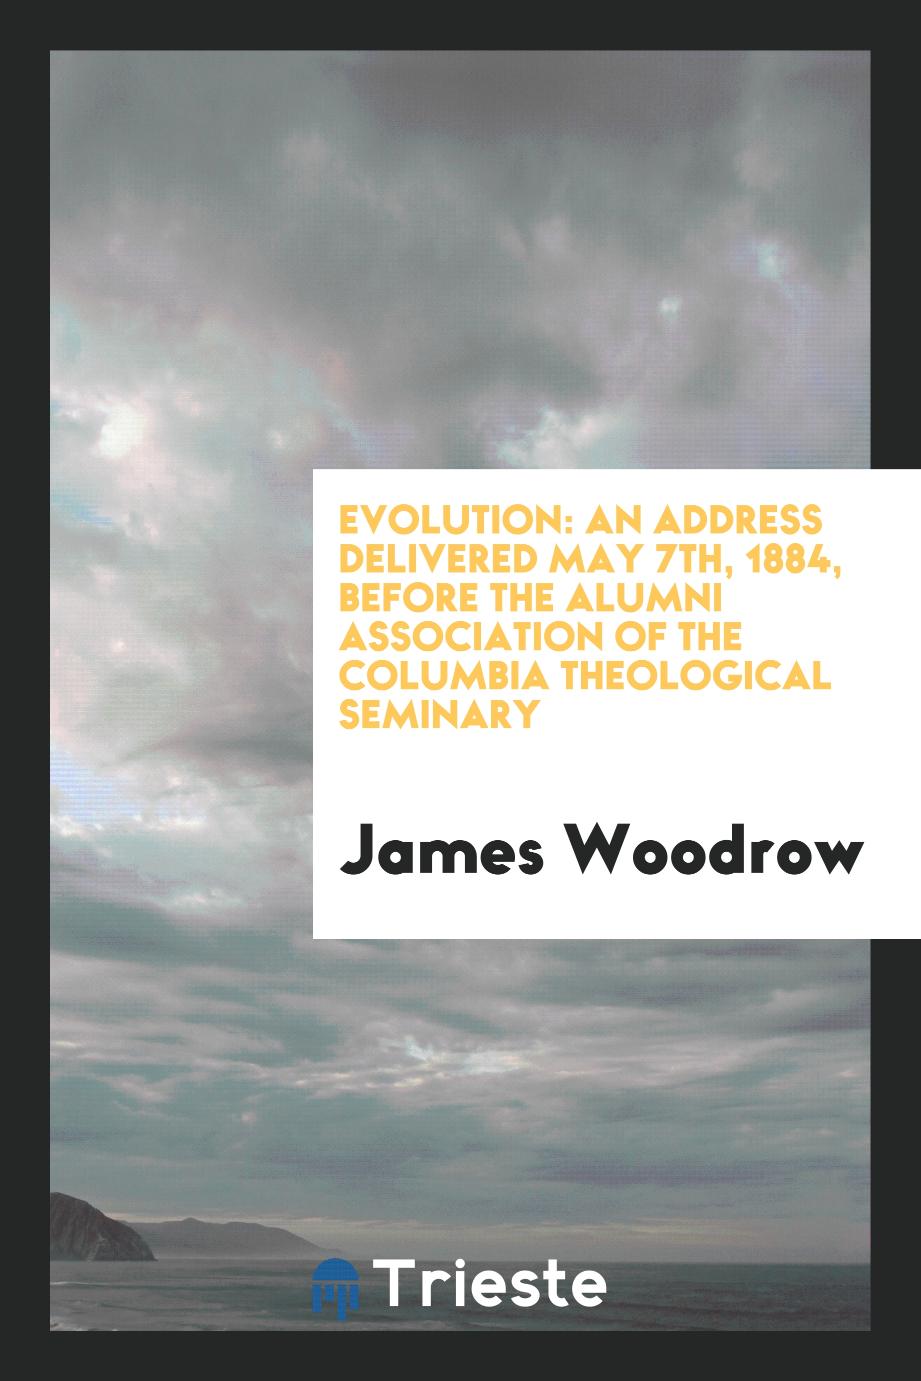 Evolution: An Address Delivered May 7th, 1884, Before the Alumni Association of the Columbia Theological Seminary